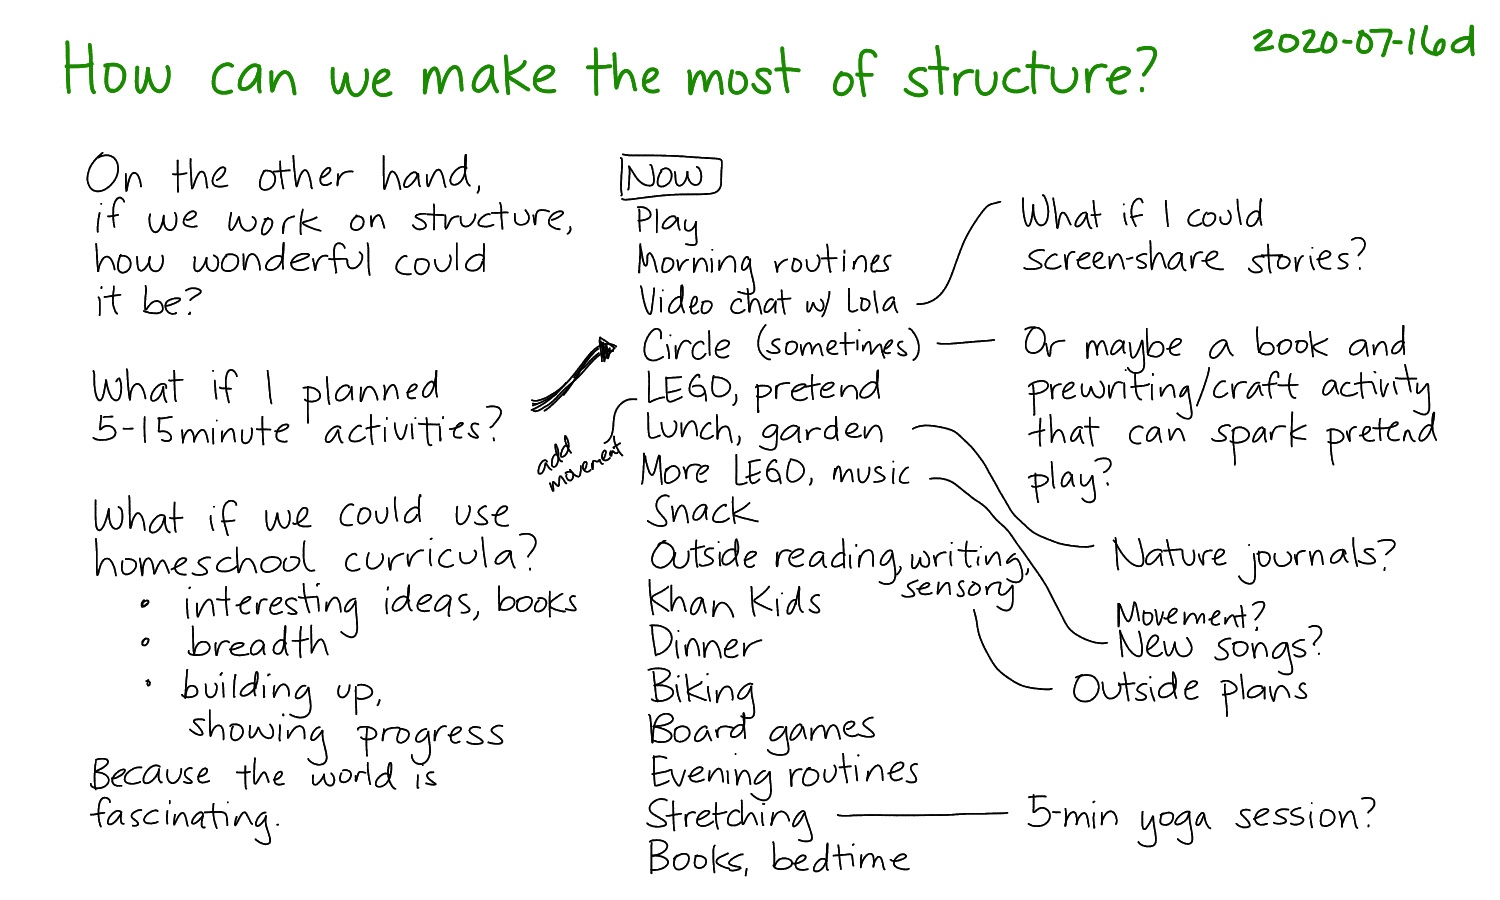 2020-07-16d How can we make the most of structure #parenting #education.png